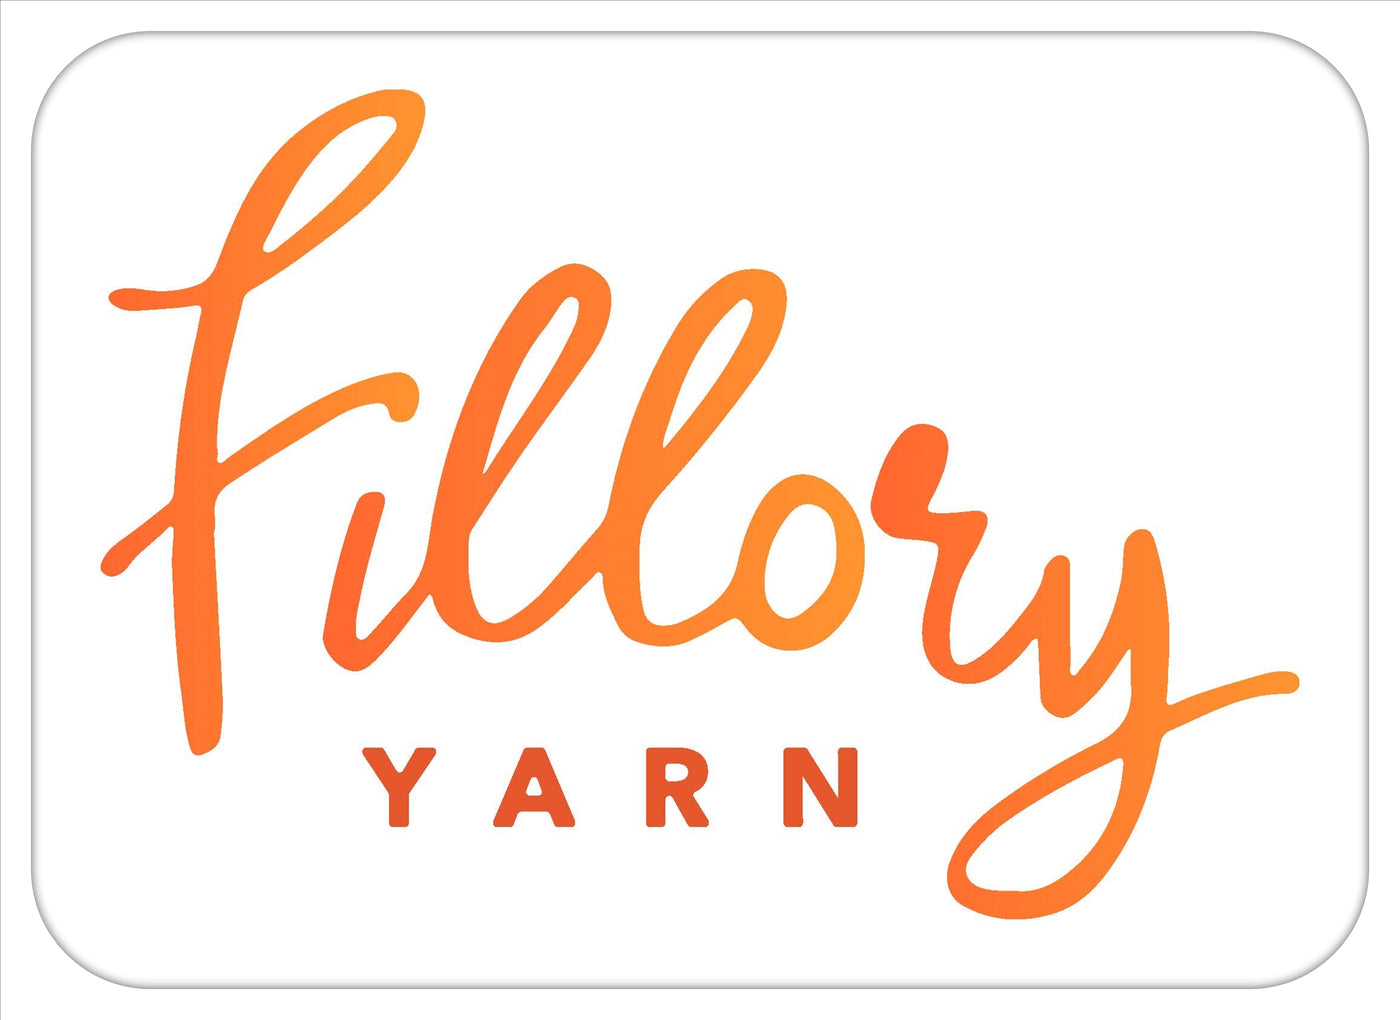 Physical Gift Card of $500 - Fillory Yarn